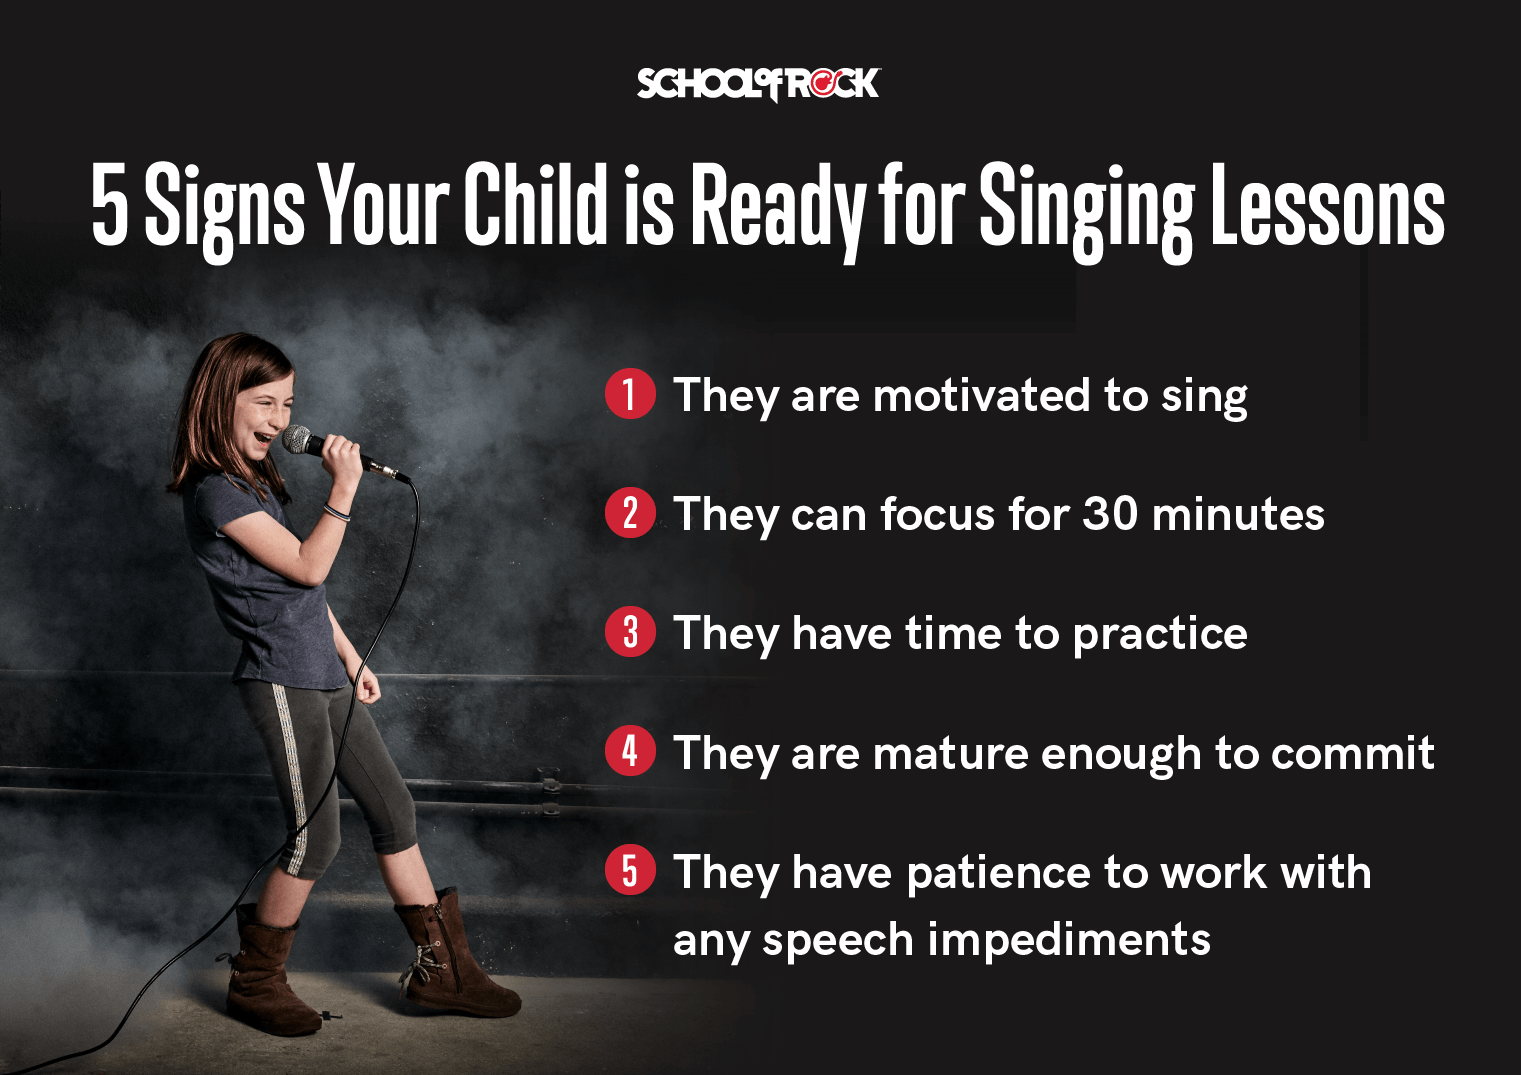 5 signs your child is ready for singing lessons